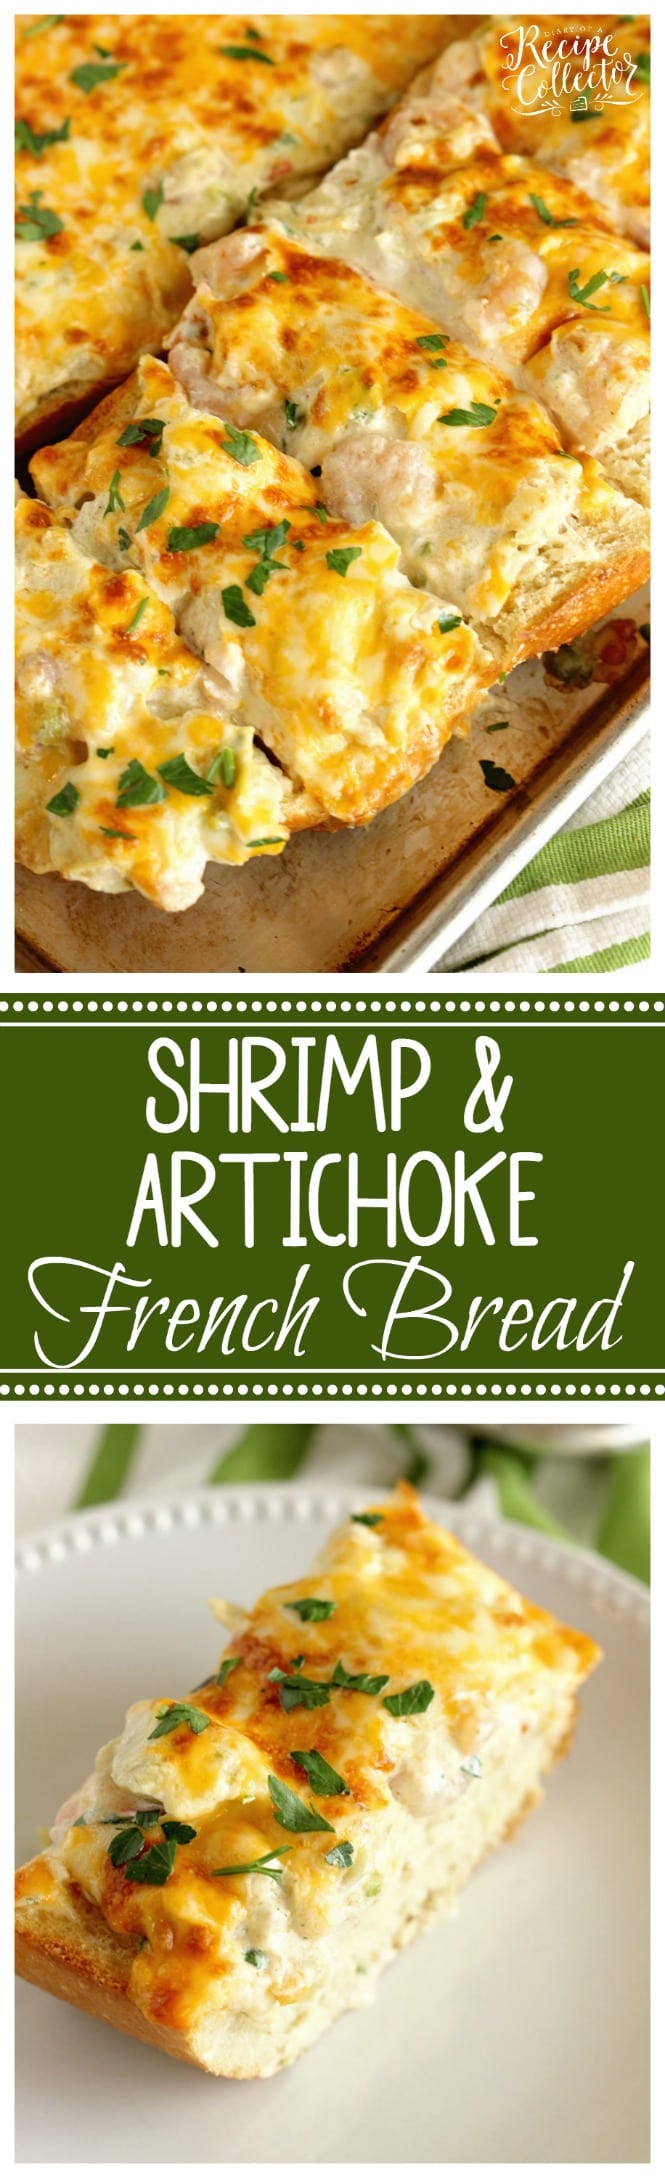 Shrimp & Artichoke French Bread - A perfect appetizer made with a cheesy, creamy topping filled with shrimp and artichokes!